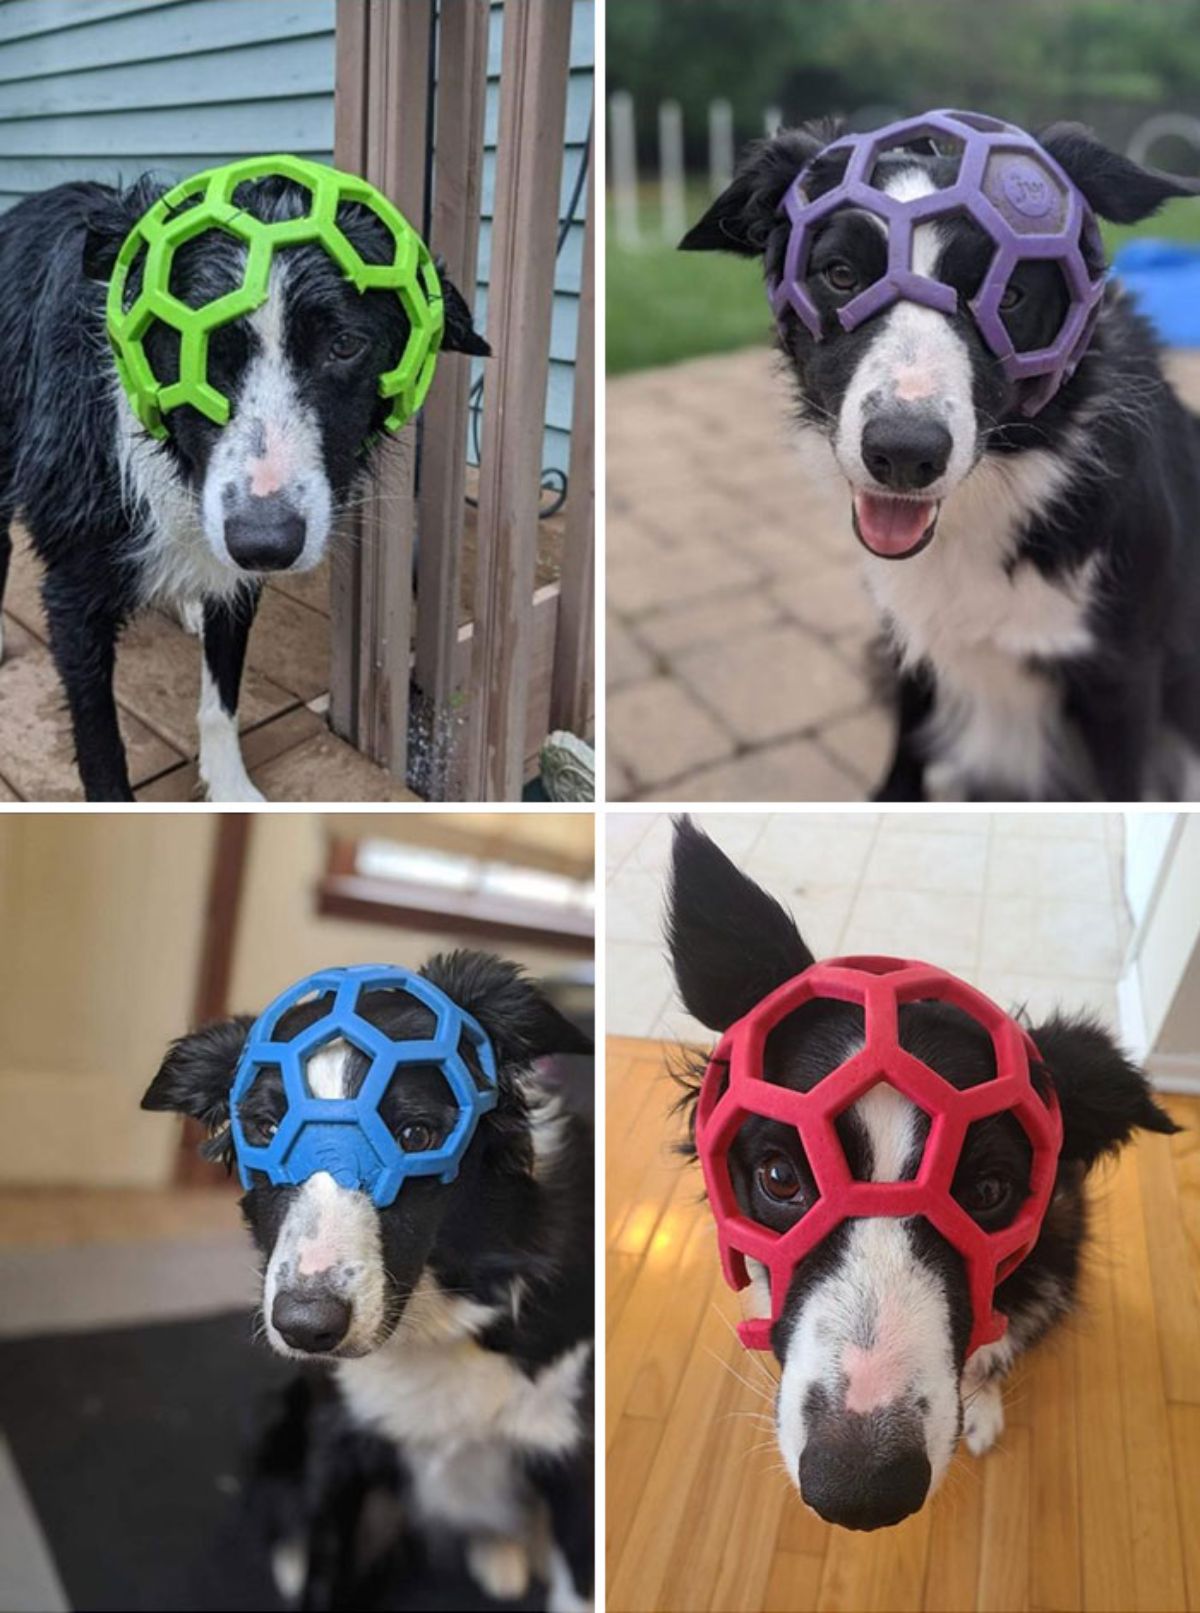 4 photos of black and white dog with 4 different balls with pentagonal holes in them stuck on the dog's head